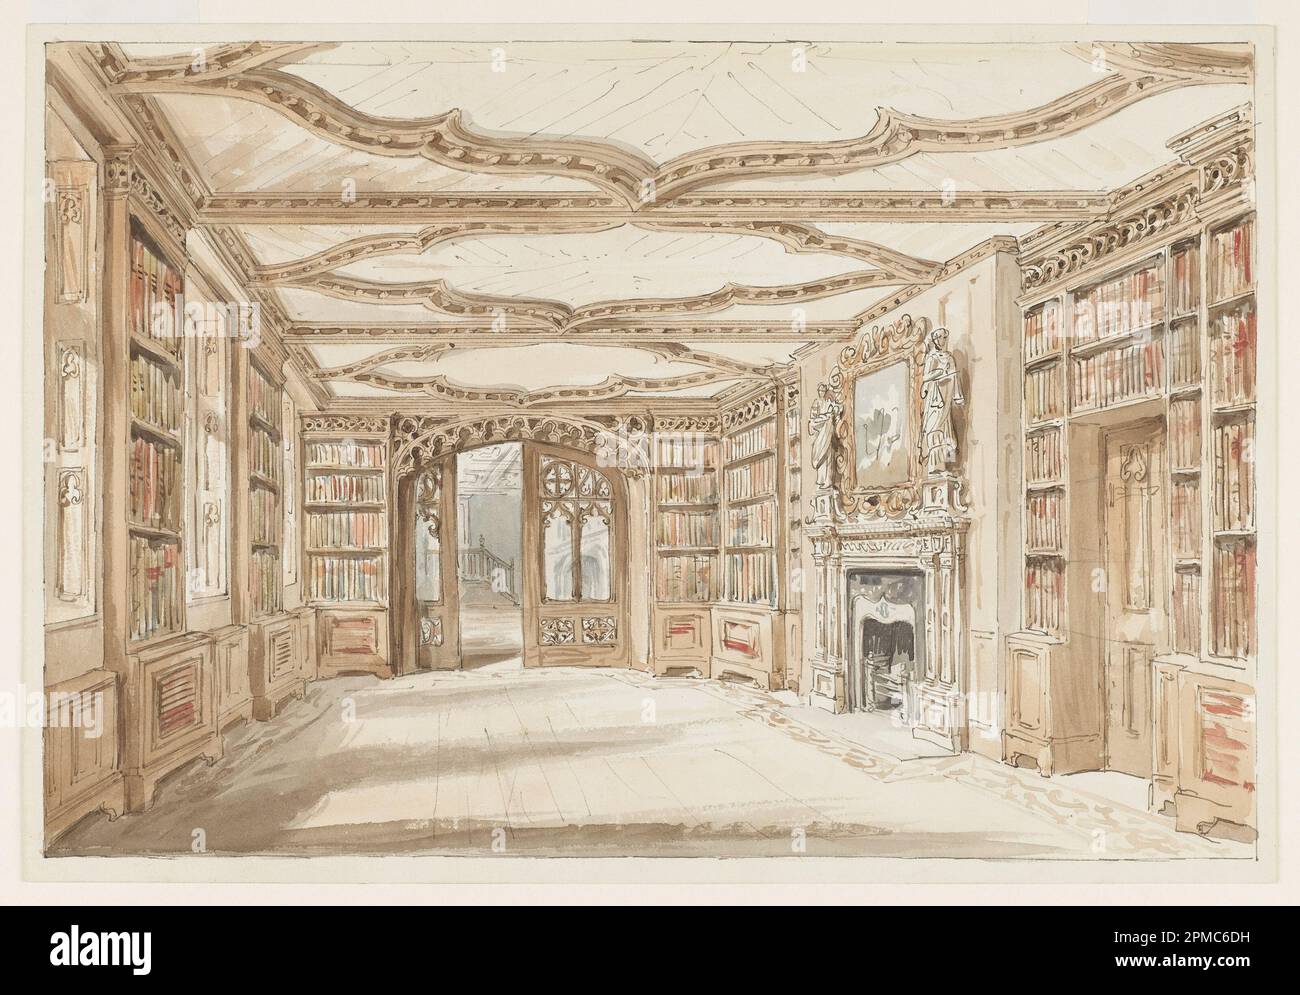 Drawing, A Library in Gothic Style; Charles James Richardson (British, 1806 – 1871); pen and brown ink, brush and watercolor, graphite on white wove paper; Frame H x W x D: 44.8 x 60.3 x 2.5 cm (17 5/8 x 23 3/4 x 1 in.) Sheet: 27.4 x 39.8 cm (10 13/16 x 15 11/16 in.); Thaw Collection; 2007-27-63 Stock Photo